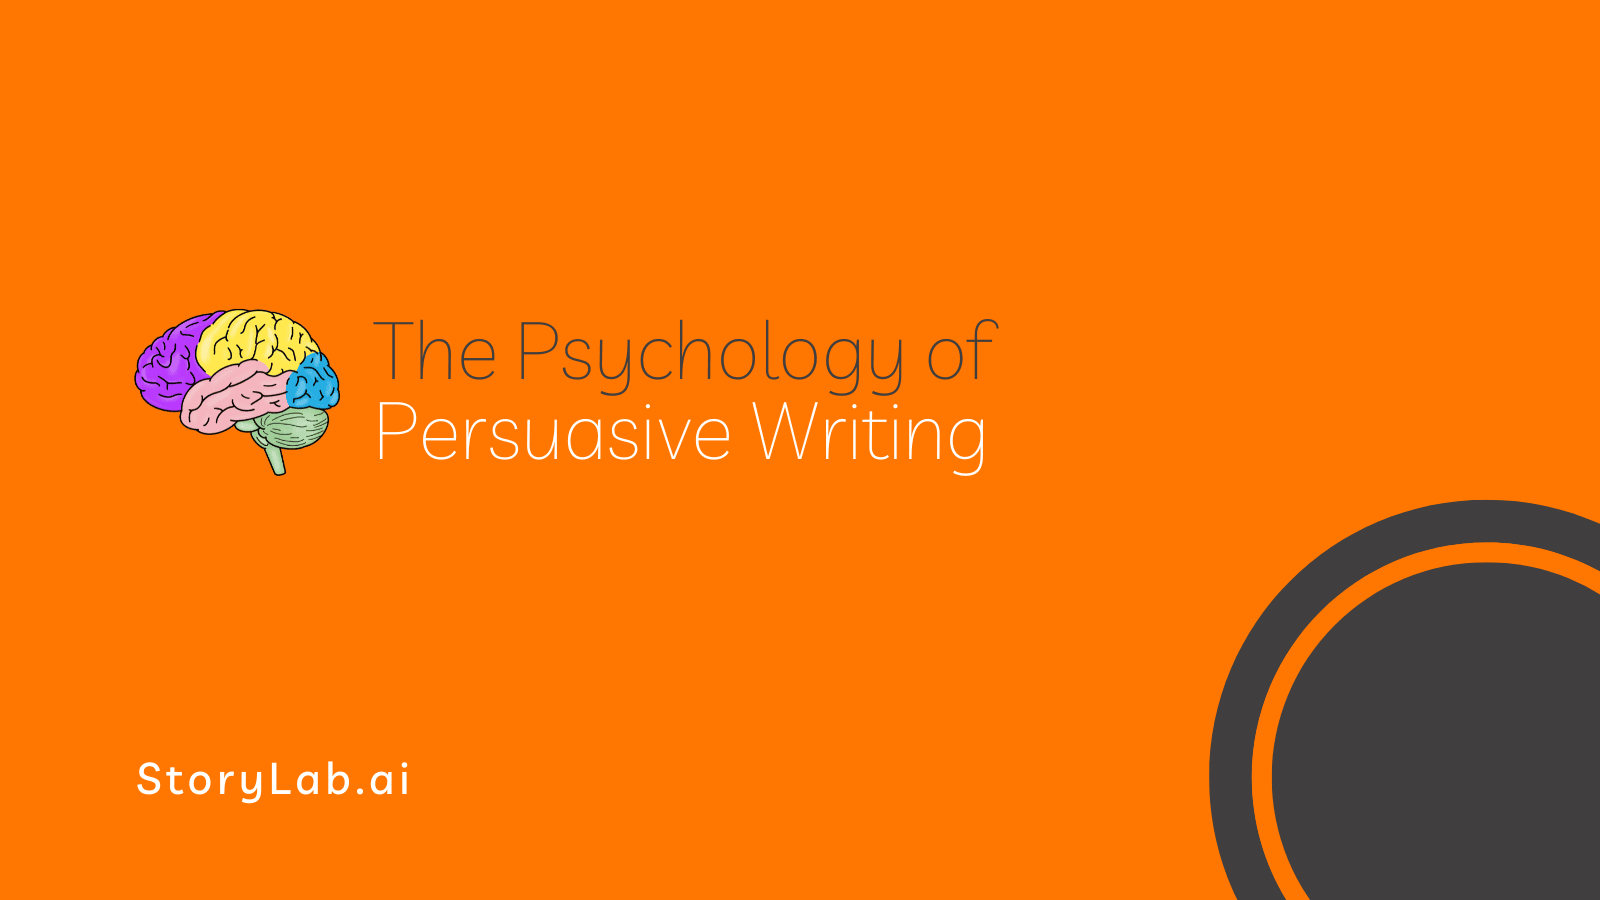 The Psychology of Persuasive Writing